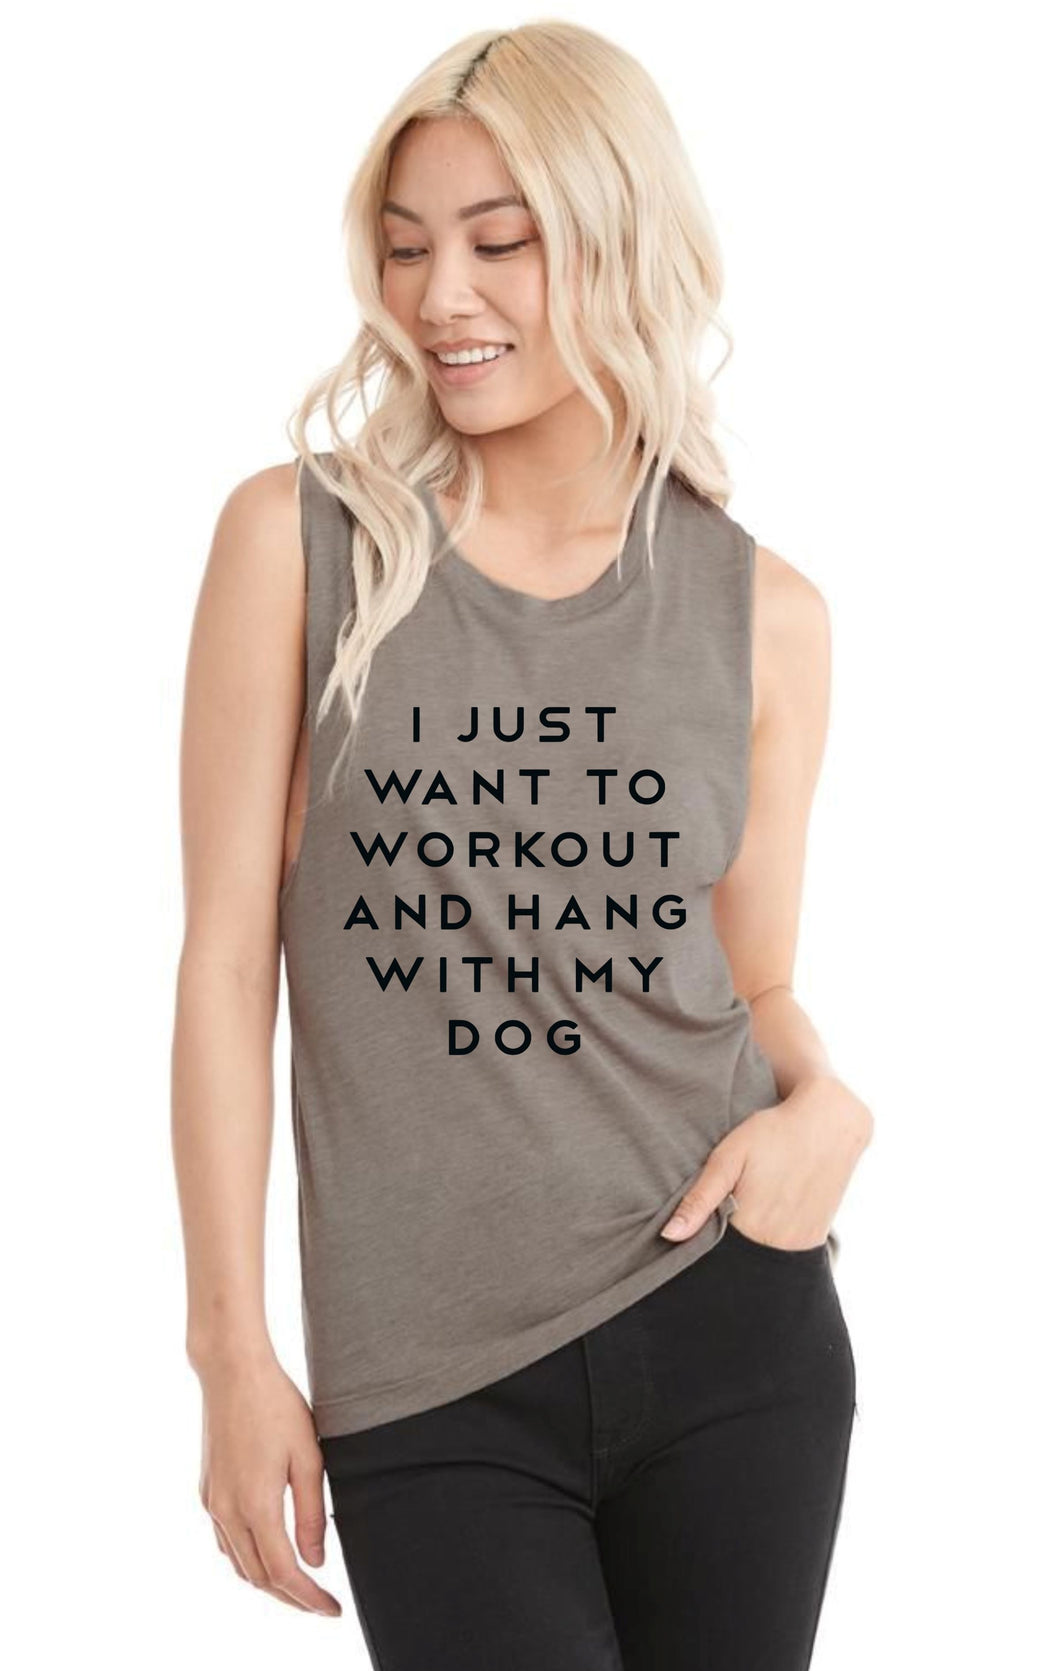 Workout And Hang With My Dog Muscle Tank - Gym Babe Apparel